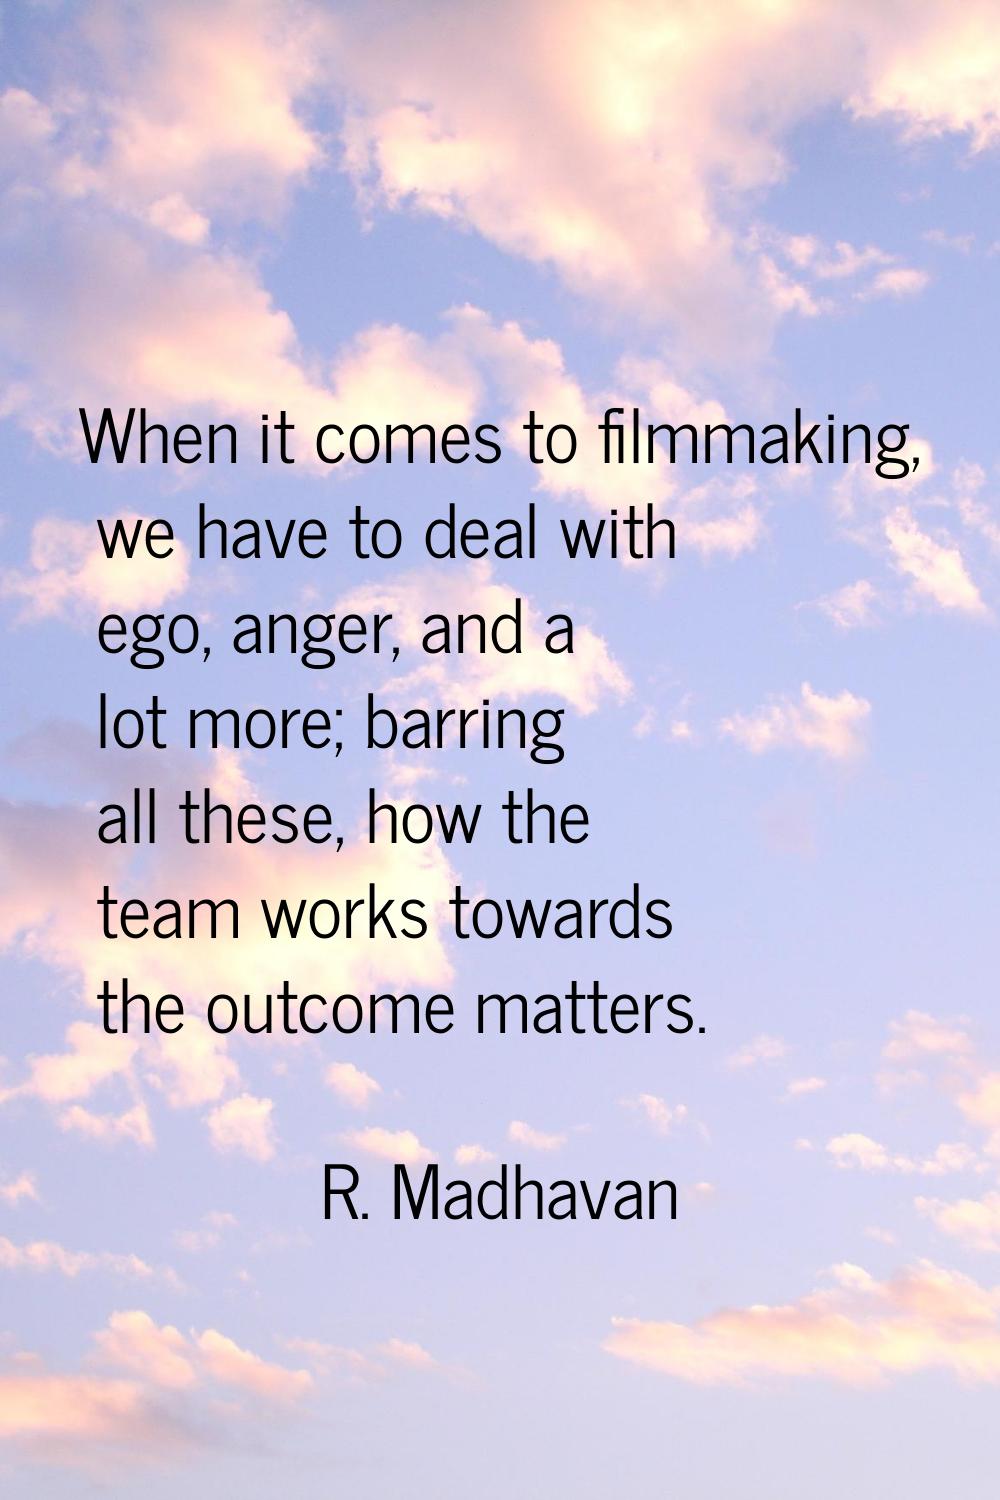 When it comes to filmmaking, we have to deal with ego, anger, and a lot more; barring all these, ho